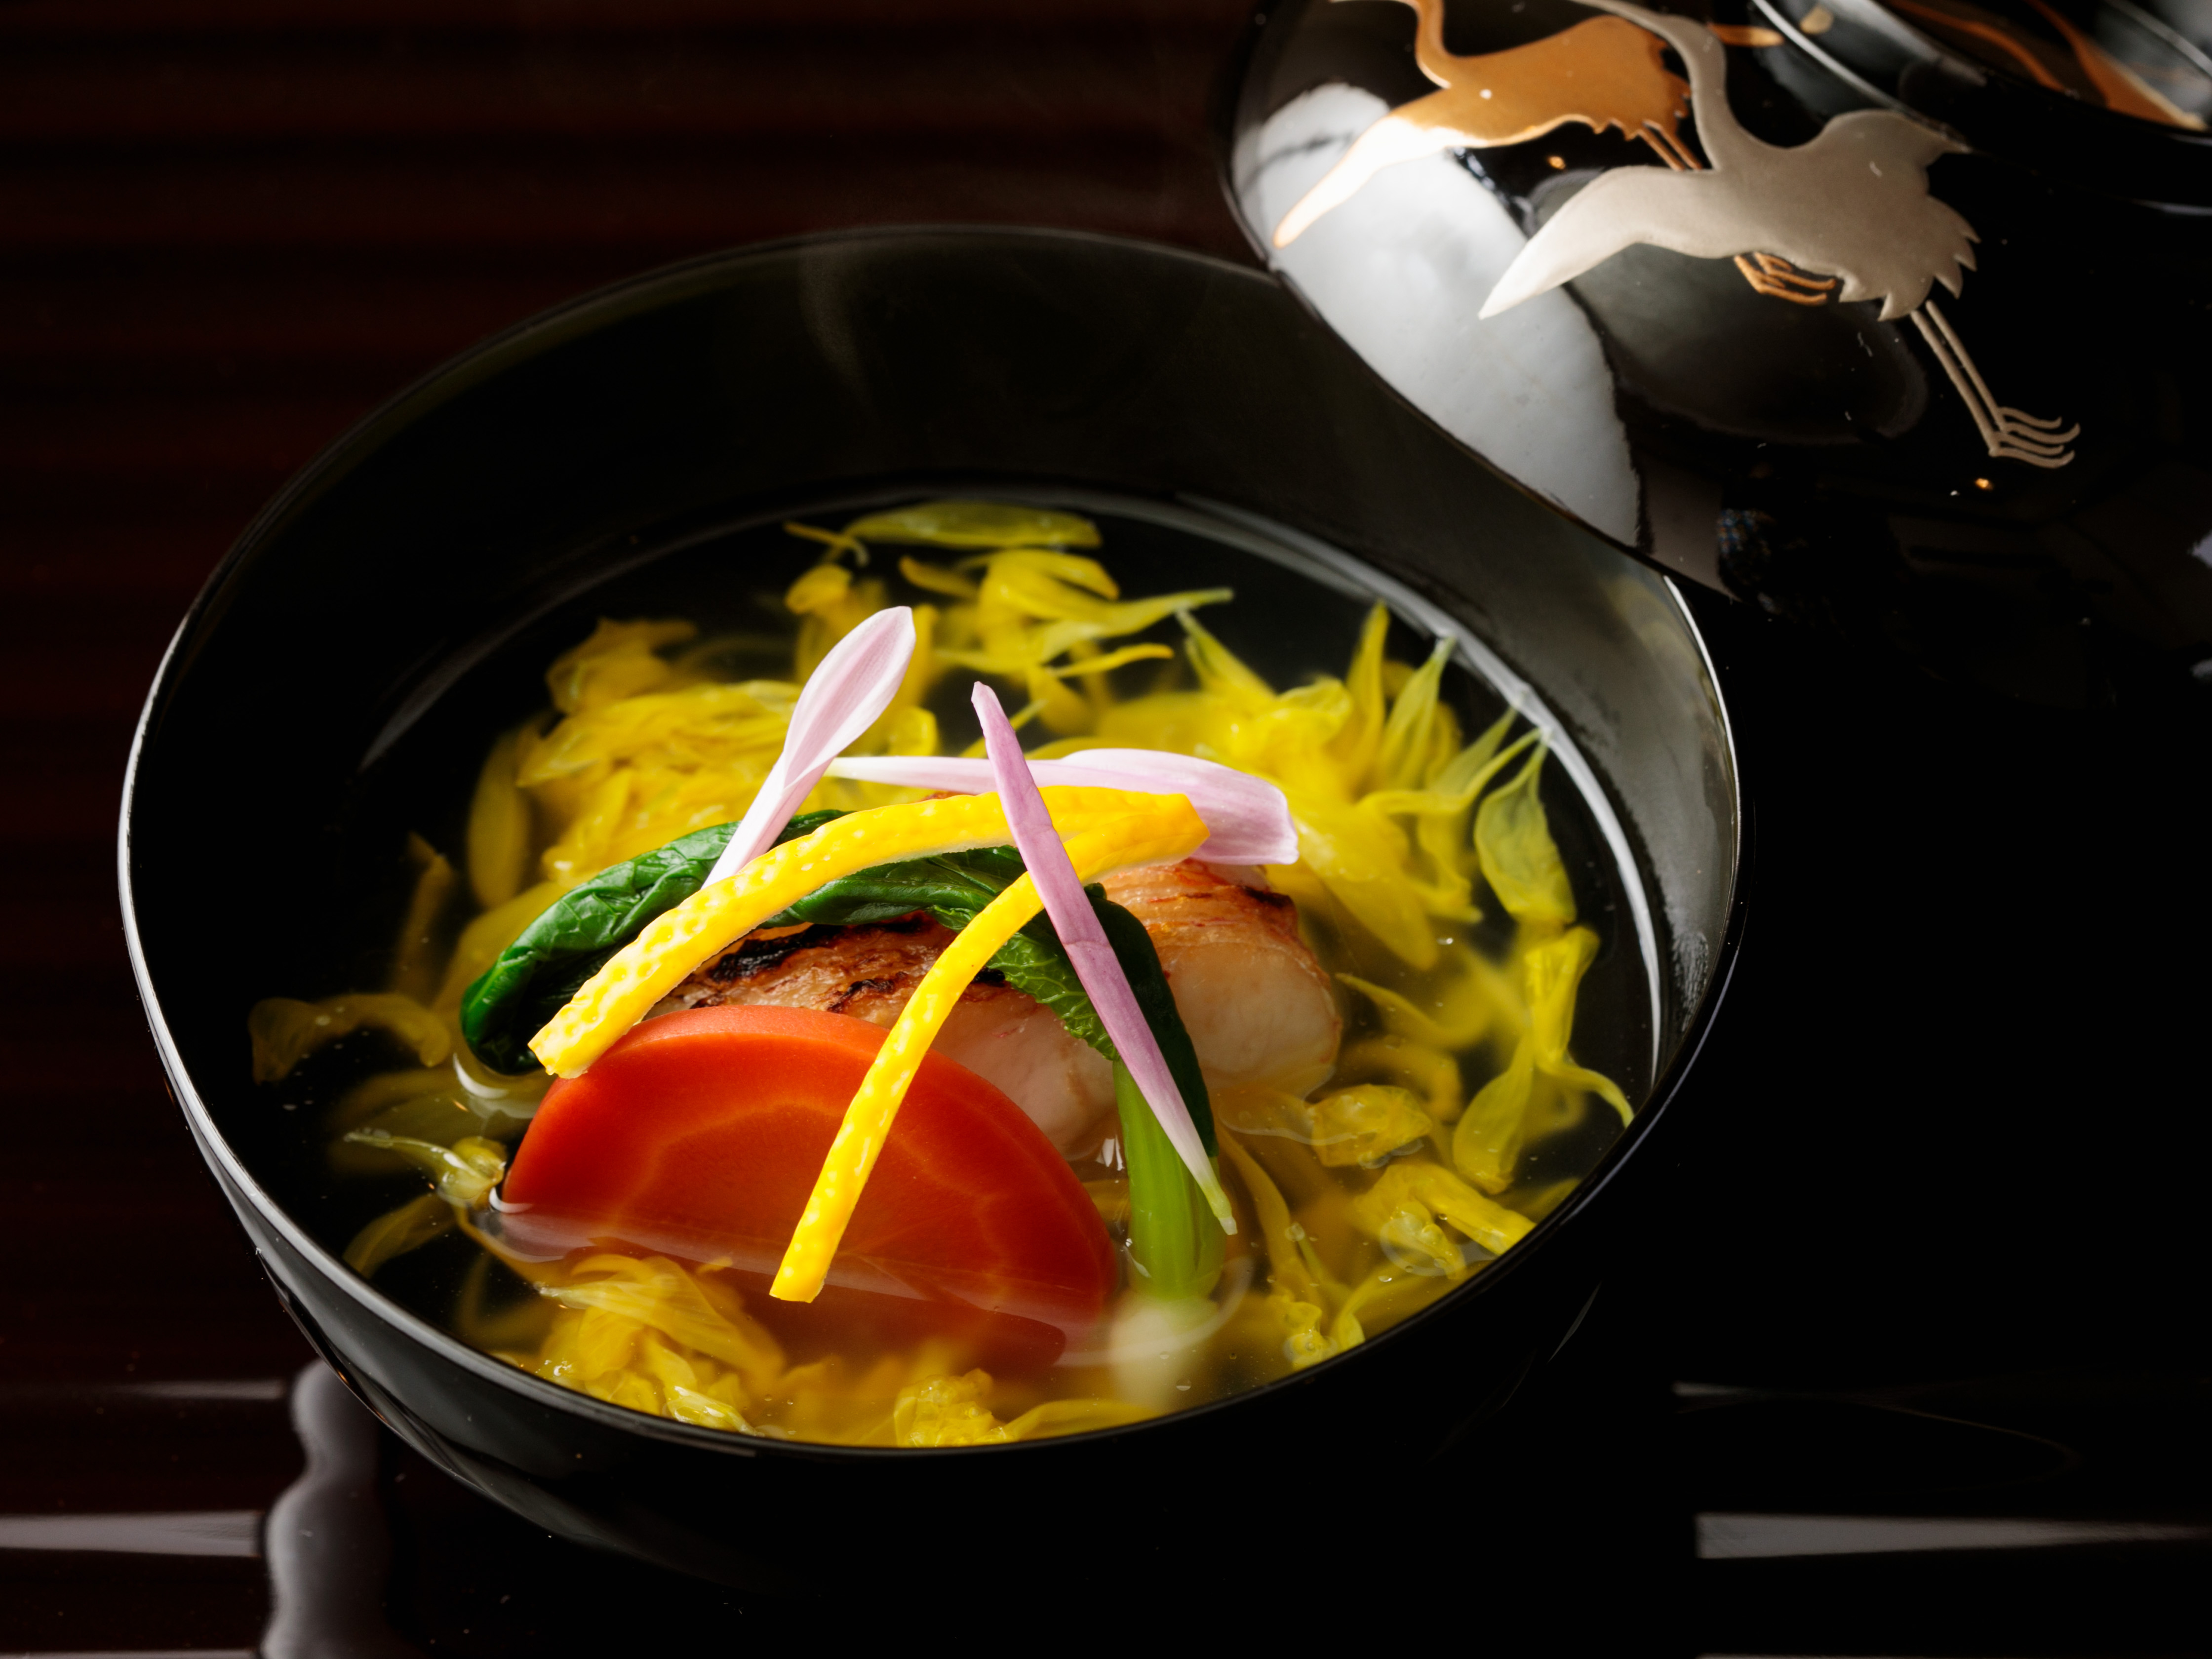 Ginza Wakuta_[Tilefish Soup in Chrysanthemum Flower] with a sophisticated broth. Also enjoy the colorful combination of the bright chrysanthemum flower and jet black bowl.